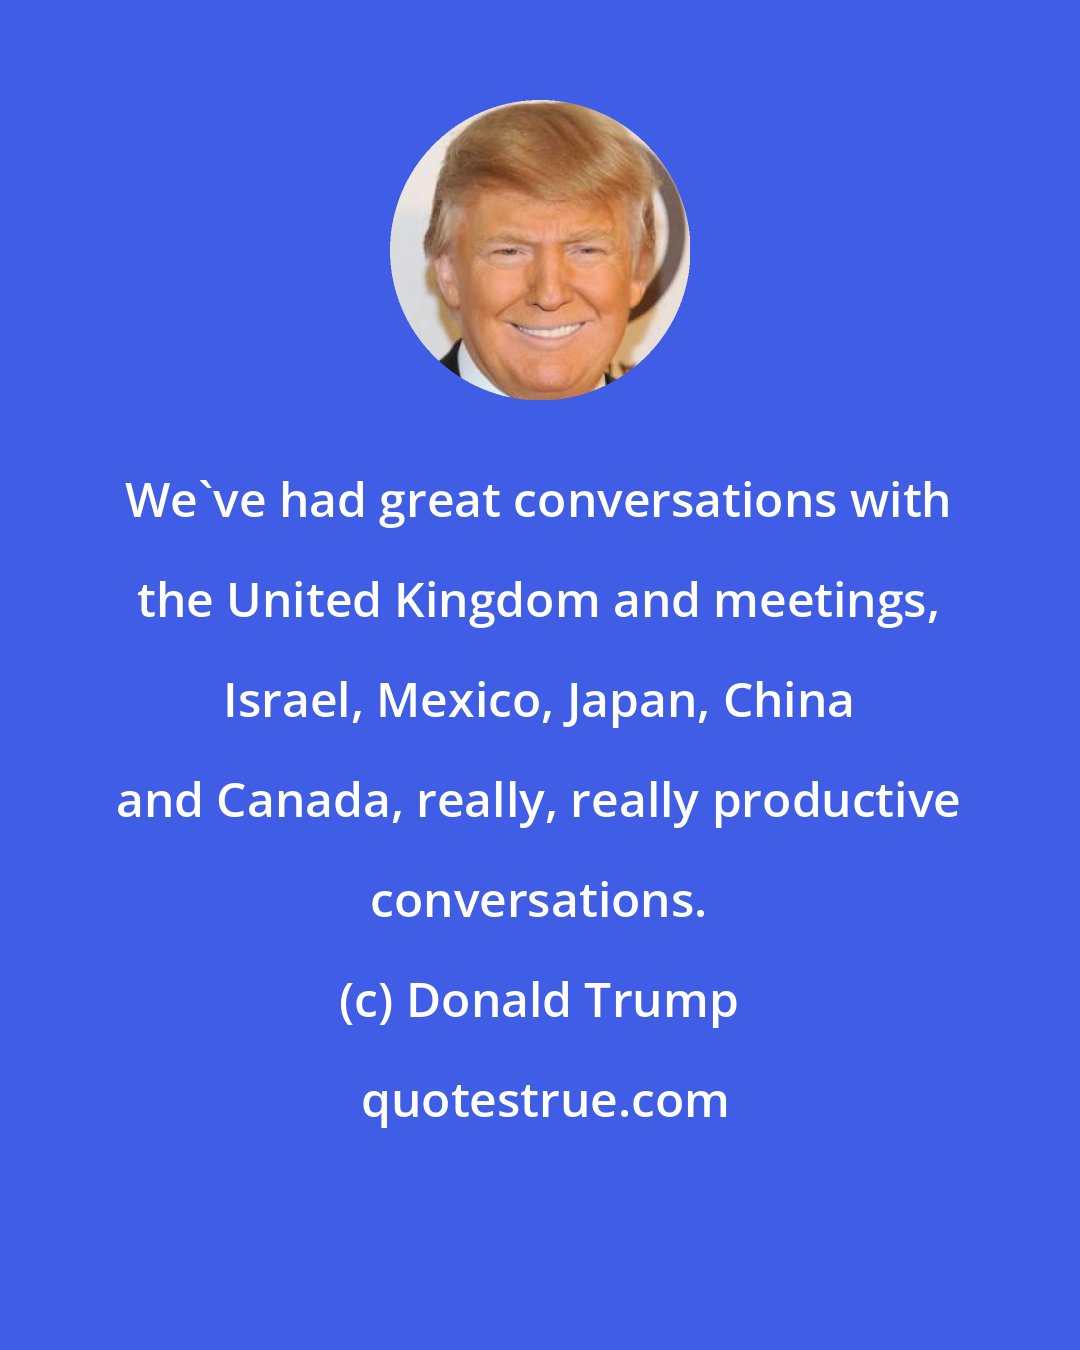 Donald Trump: We've had great conversations with the United Kingdom and meetings, Israel, Mexico, Japan, China and Canada, really, really productive conversations.